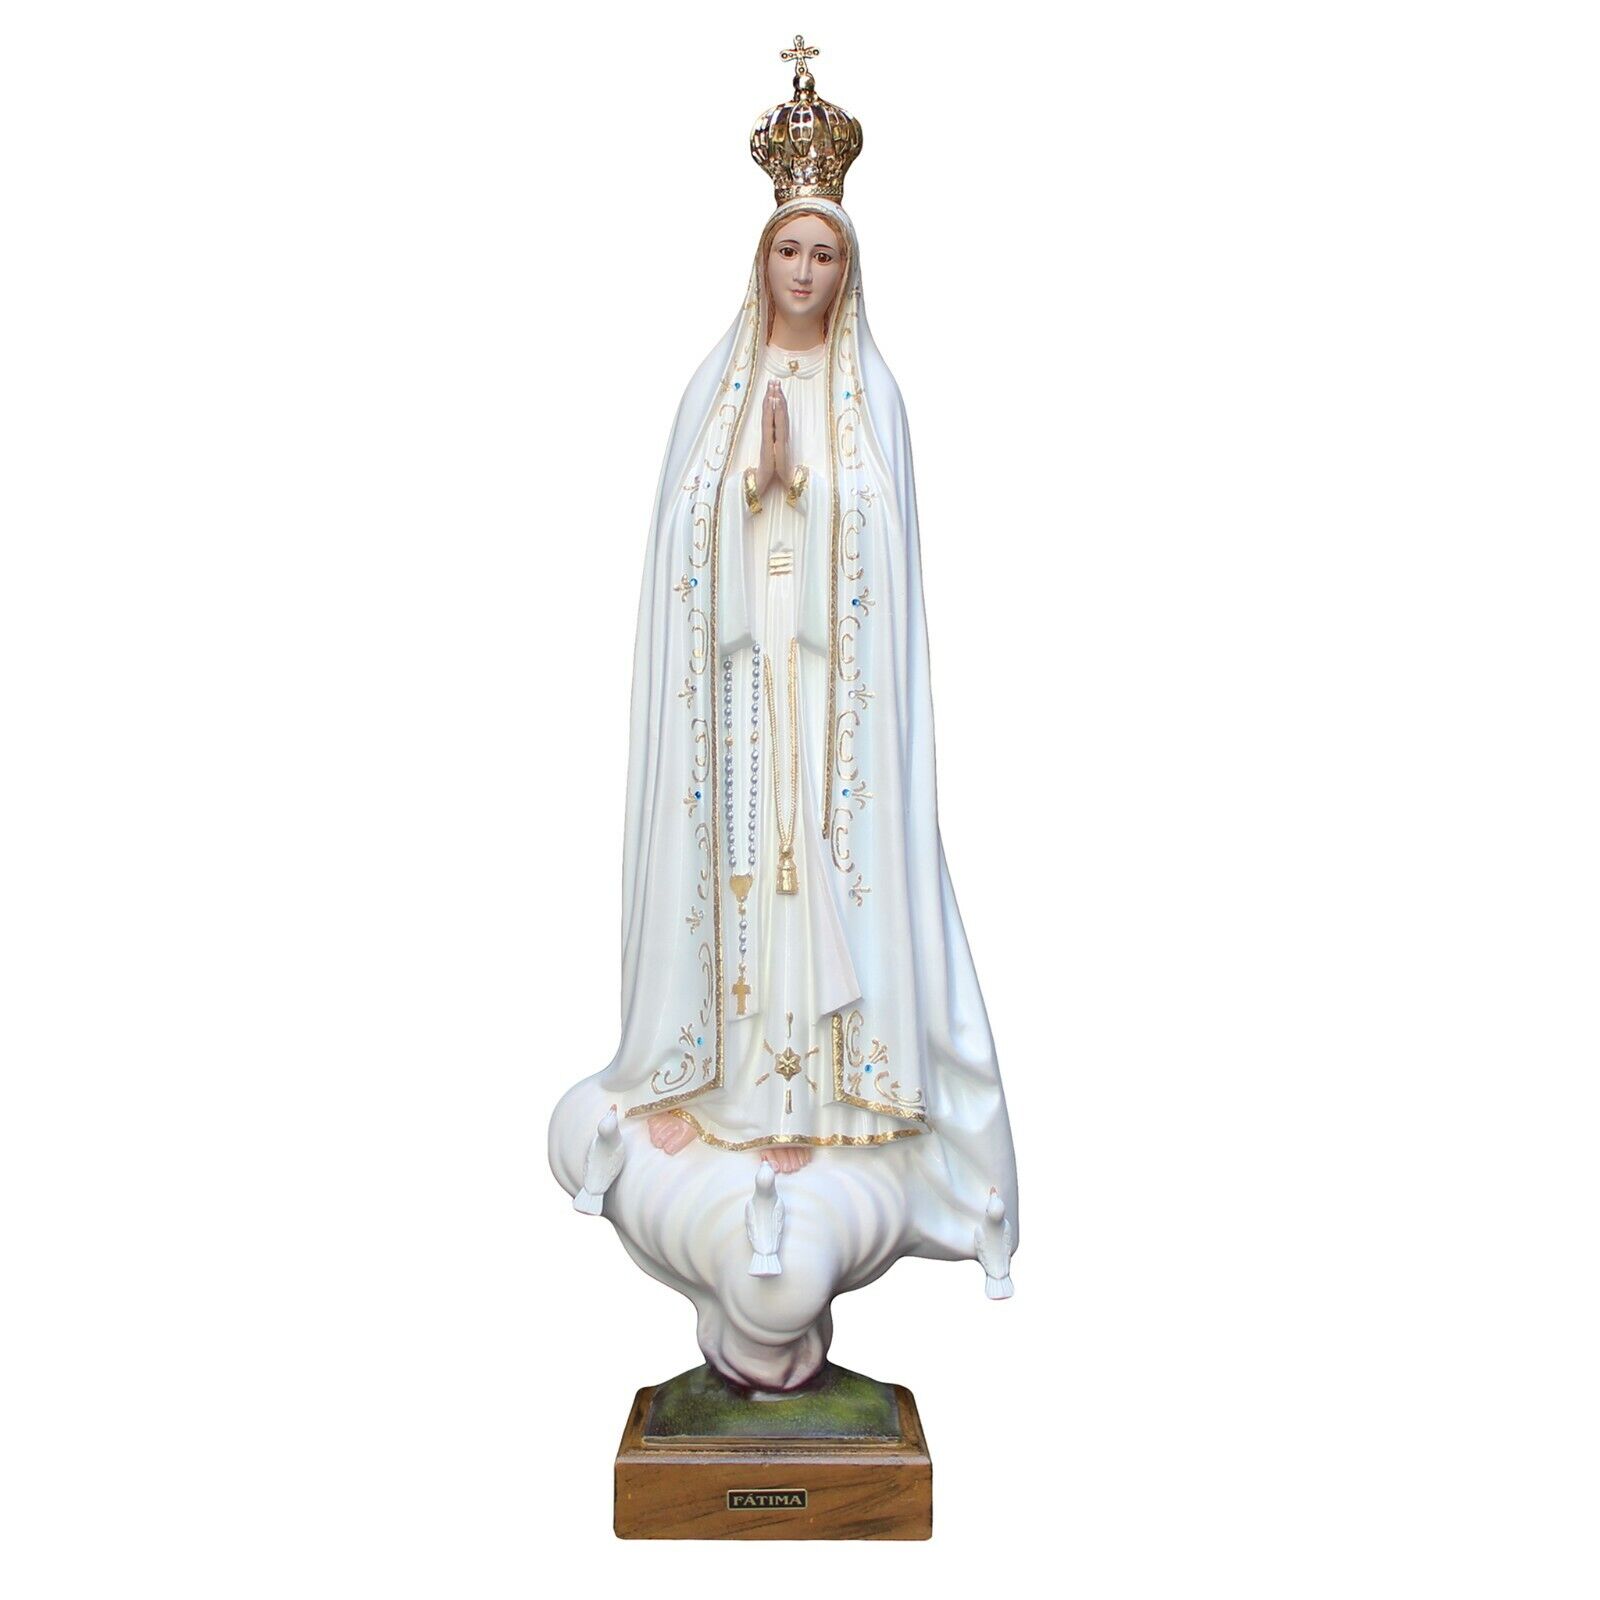 29.5 Inch Our Lady Of Fatima Virgin Mary Religious Statue Made in Portugal #1037